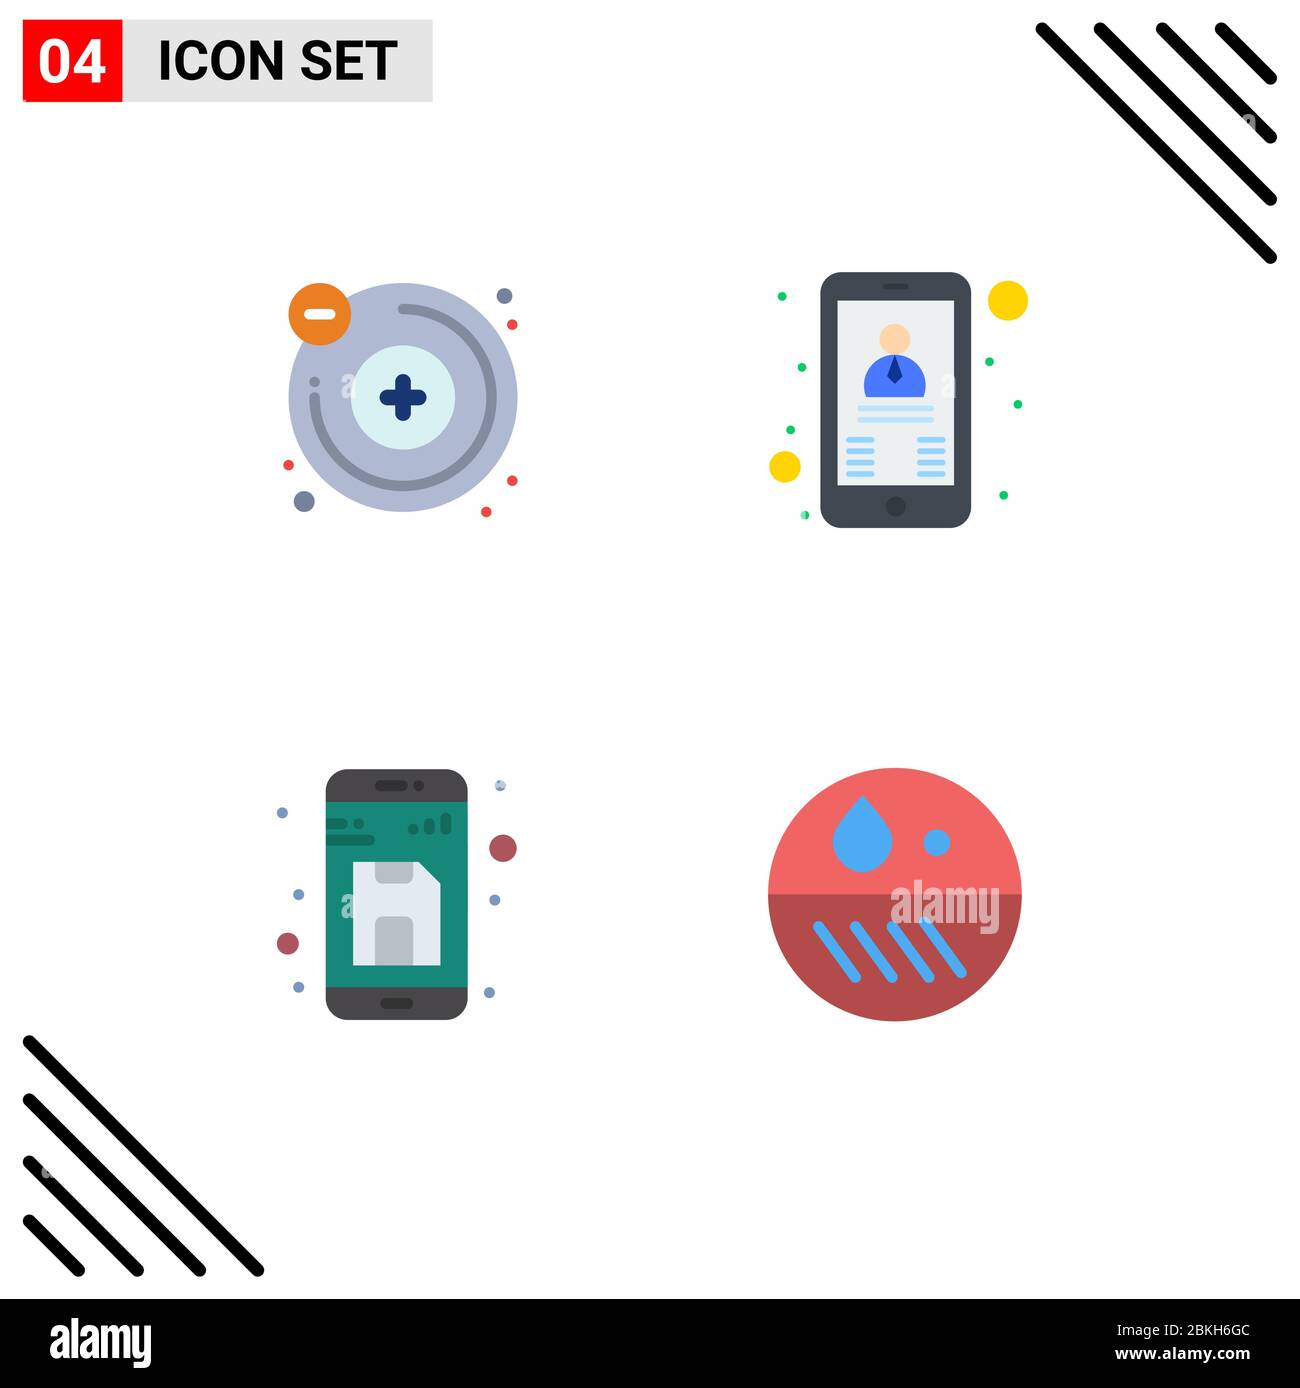 Pictogram Set of 4 Simple Flat Icons of atoms, file, contact, boss, up Editable Vector Design Elements Stock Vector